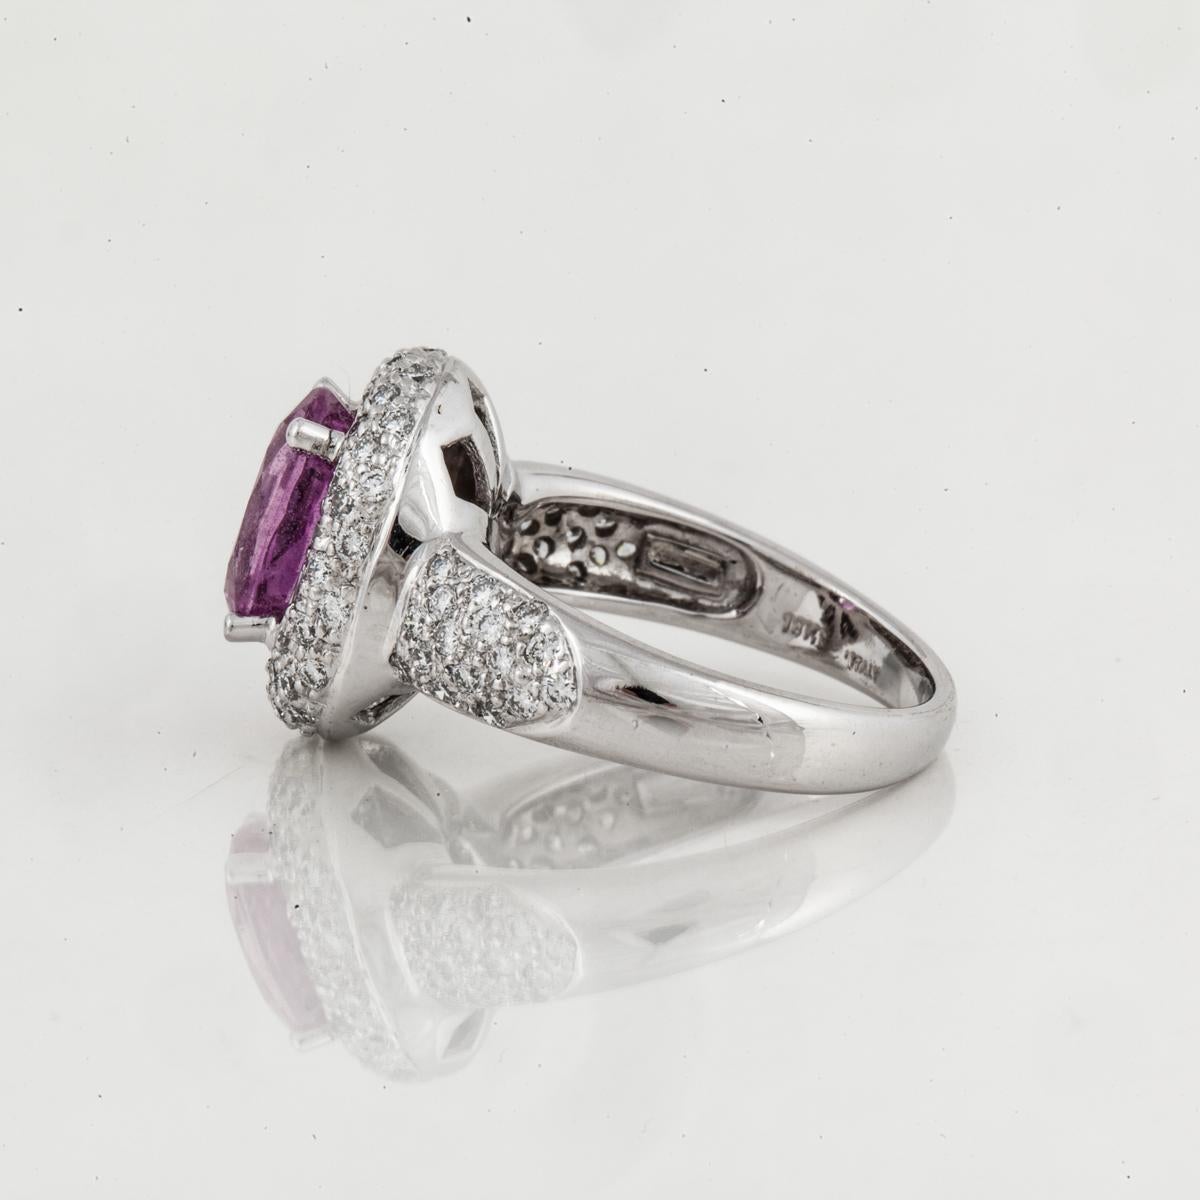 Mixed Cut 3.03 Ct. Oval Pink Sapphire and Diamond Ring in 18K White Gold For Sale